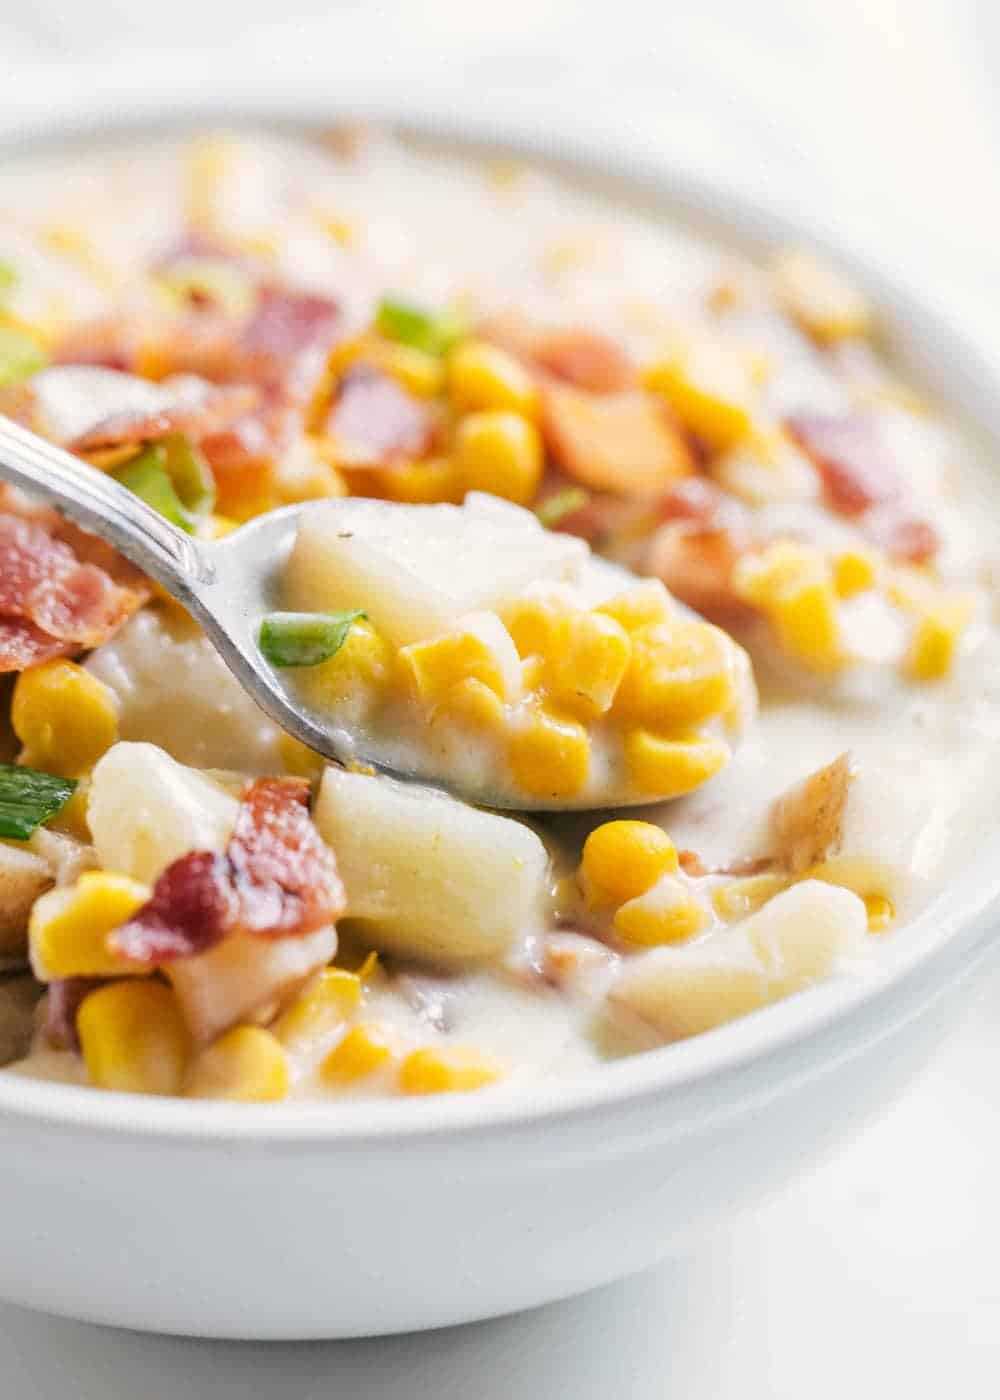 Bowl of corn chowder with spoon.